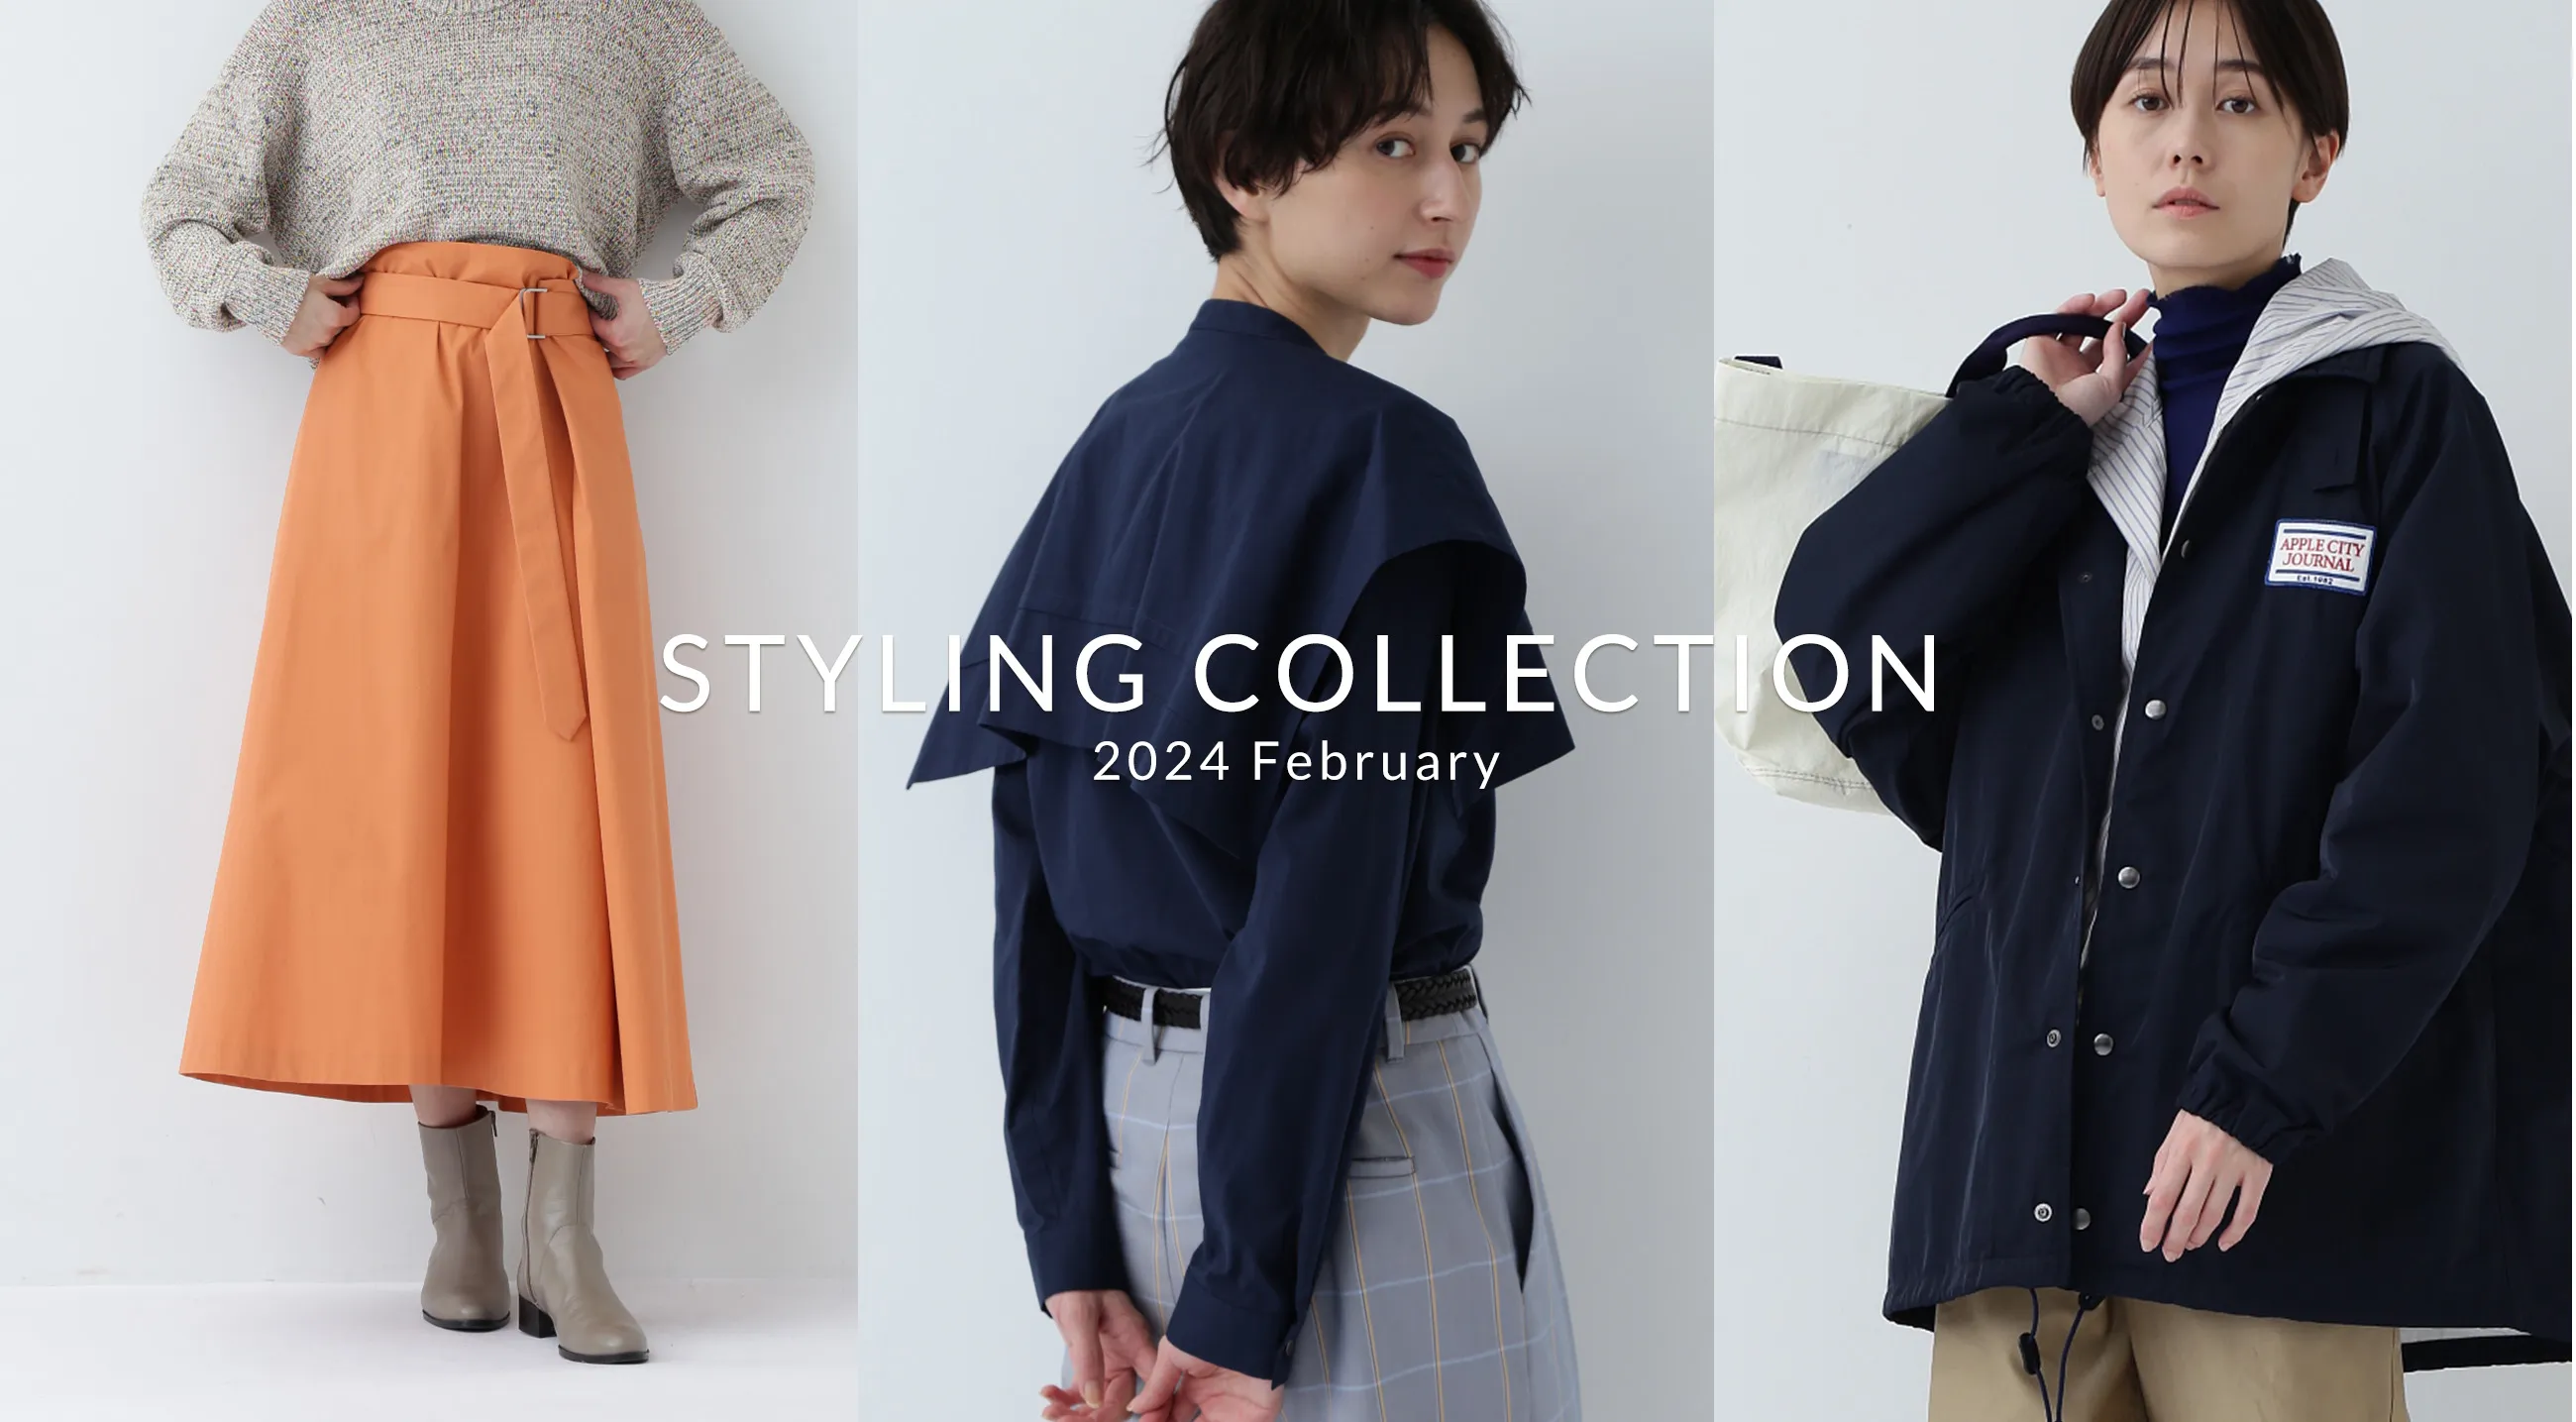 Styling Collection 2024 February